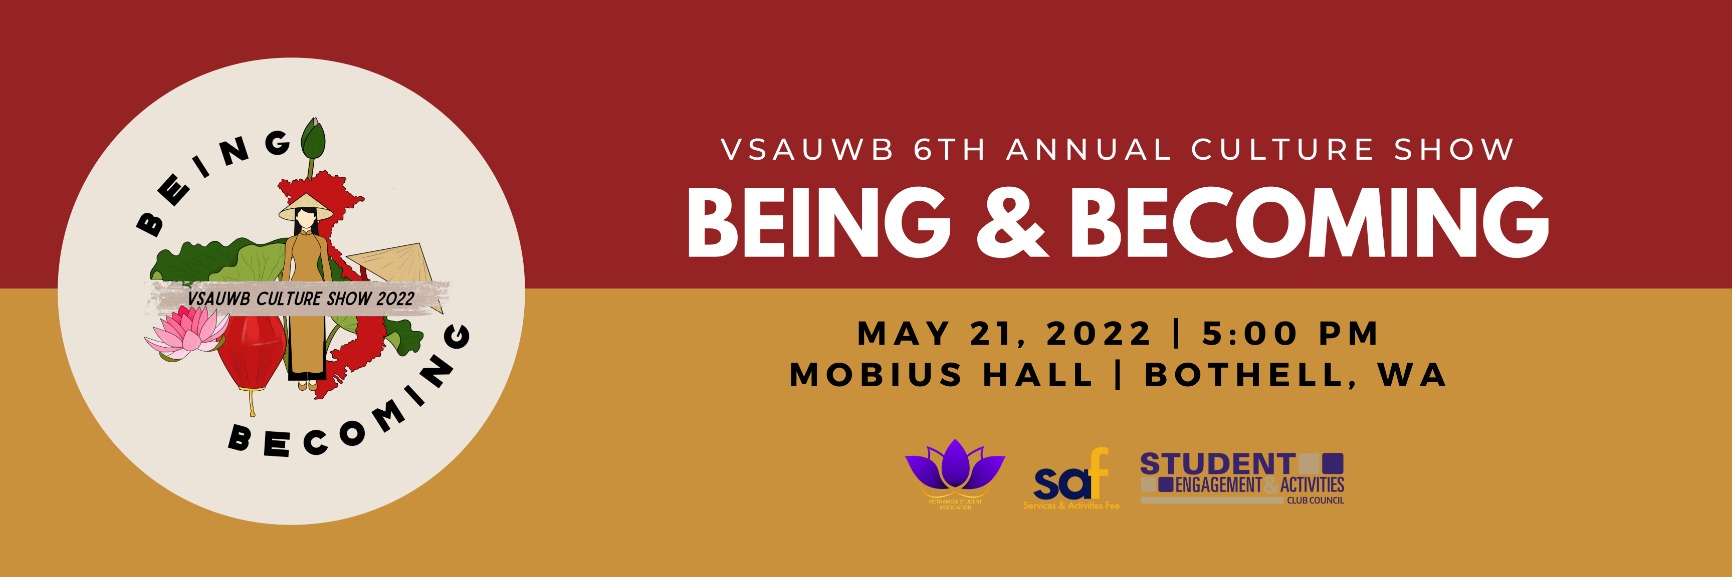 VSAUWB 6th Annual Culture Show: Being & Becoming